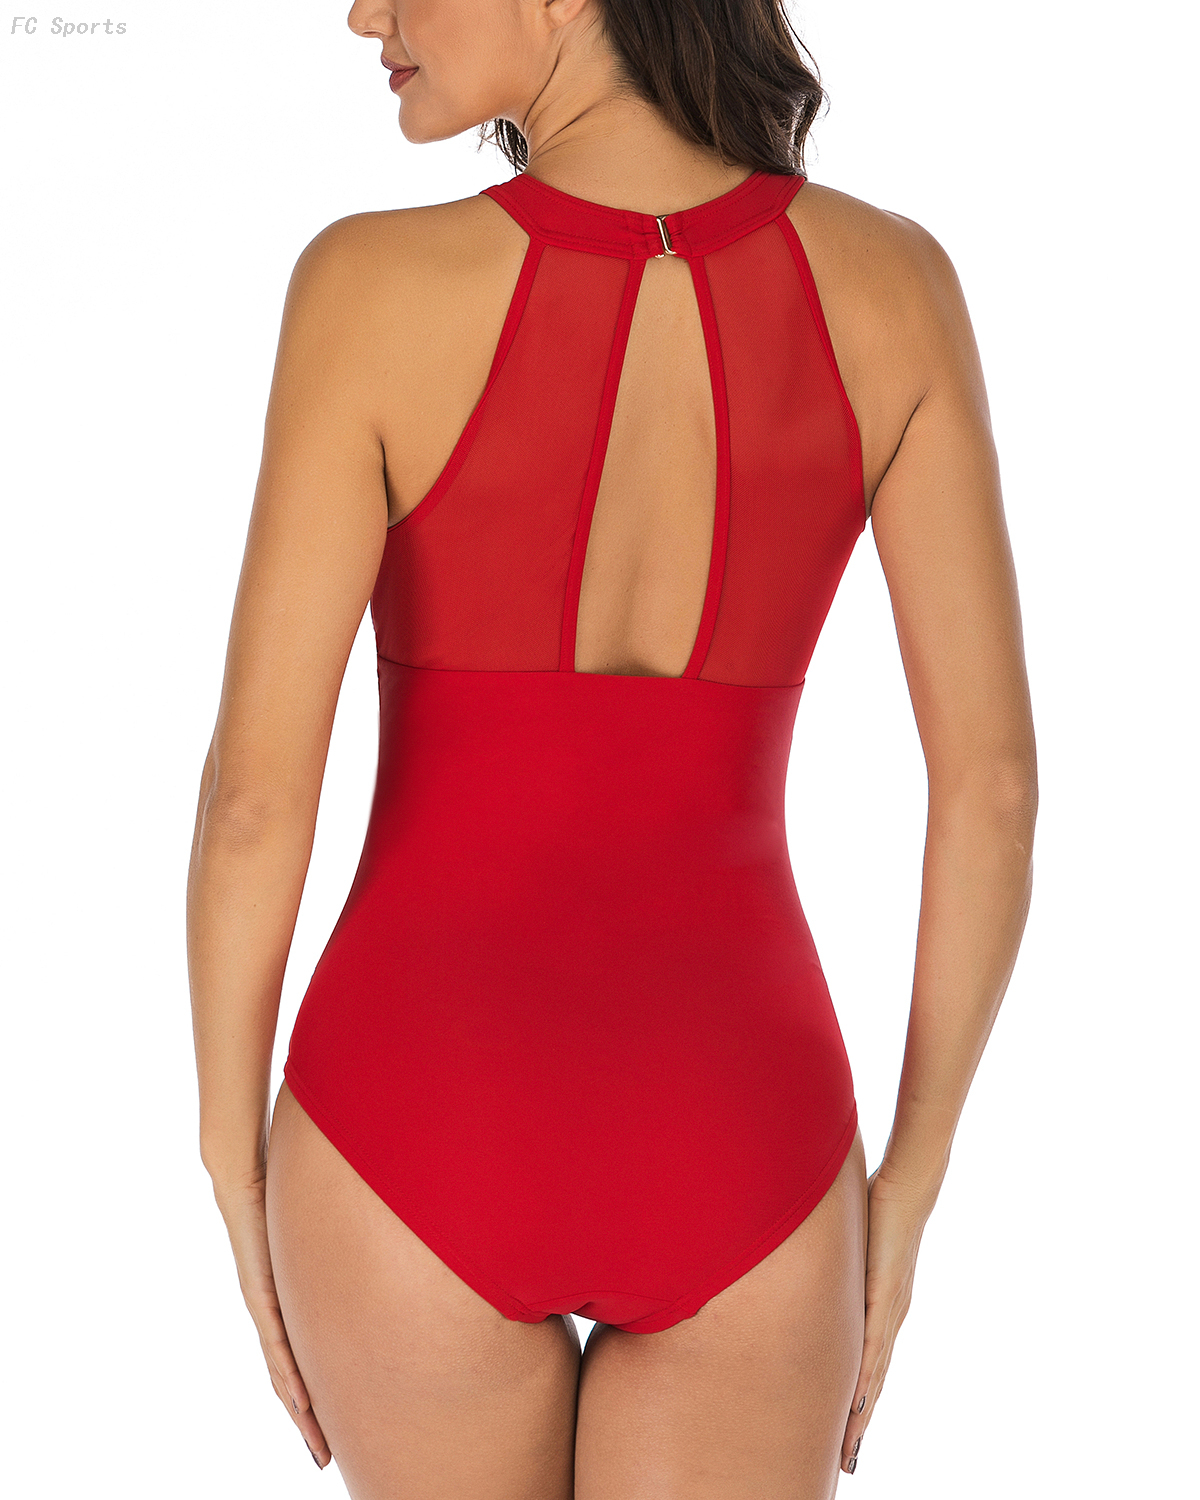 New Necklace swimsuit for women with thin, bare back and solid color 